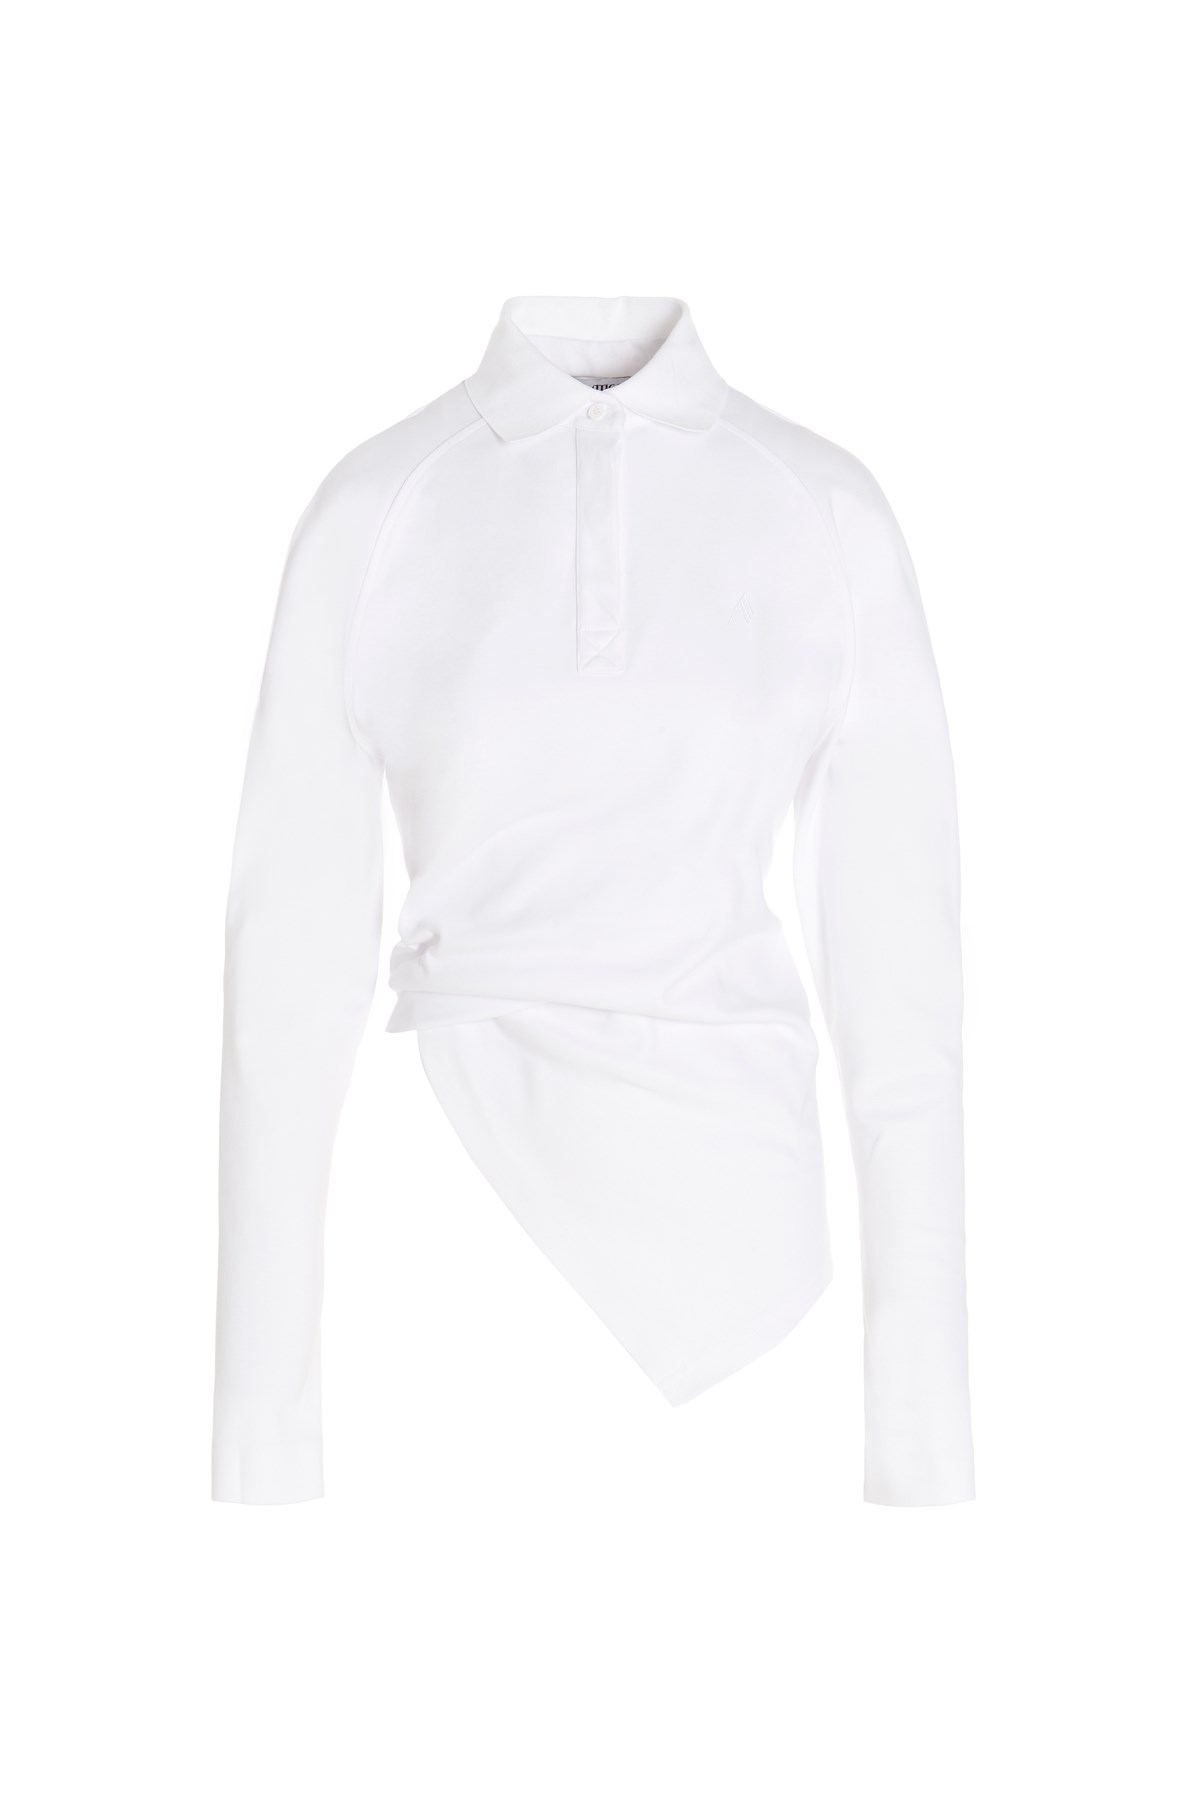 THE ATTICO Long-Sleeved Top